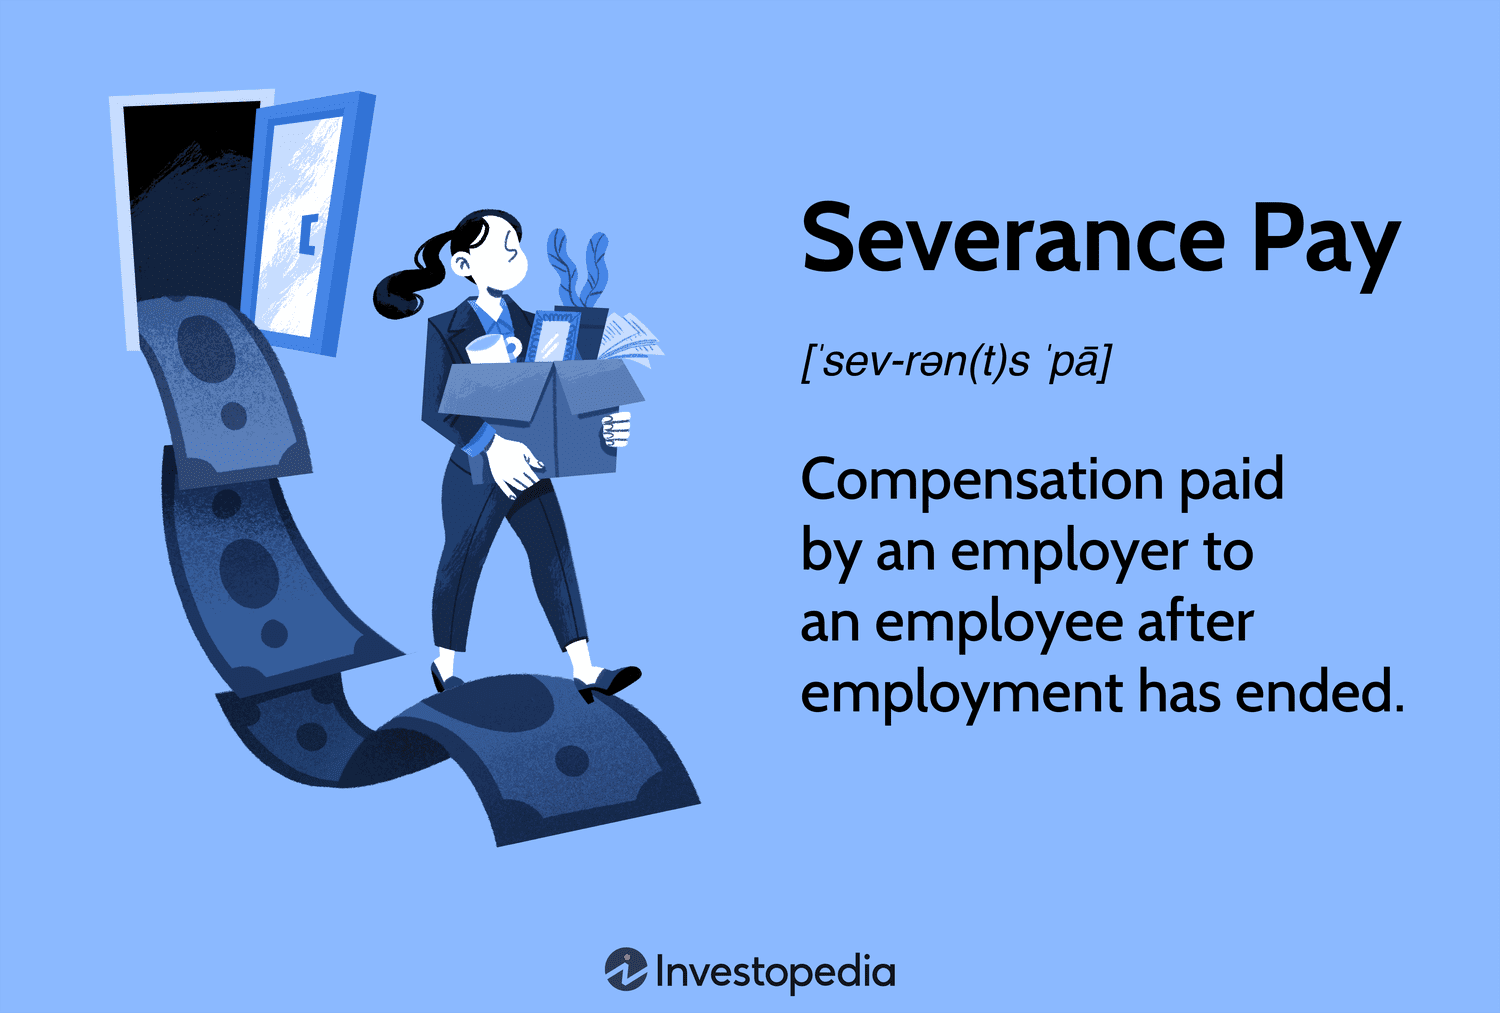 How to calculate severance pay